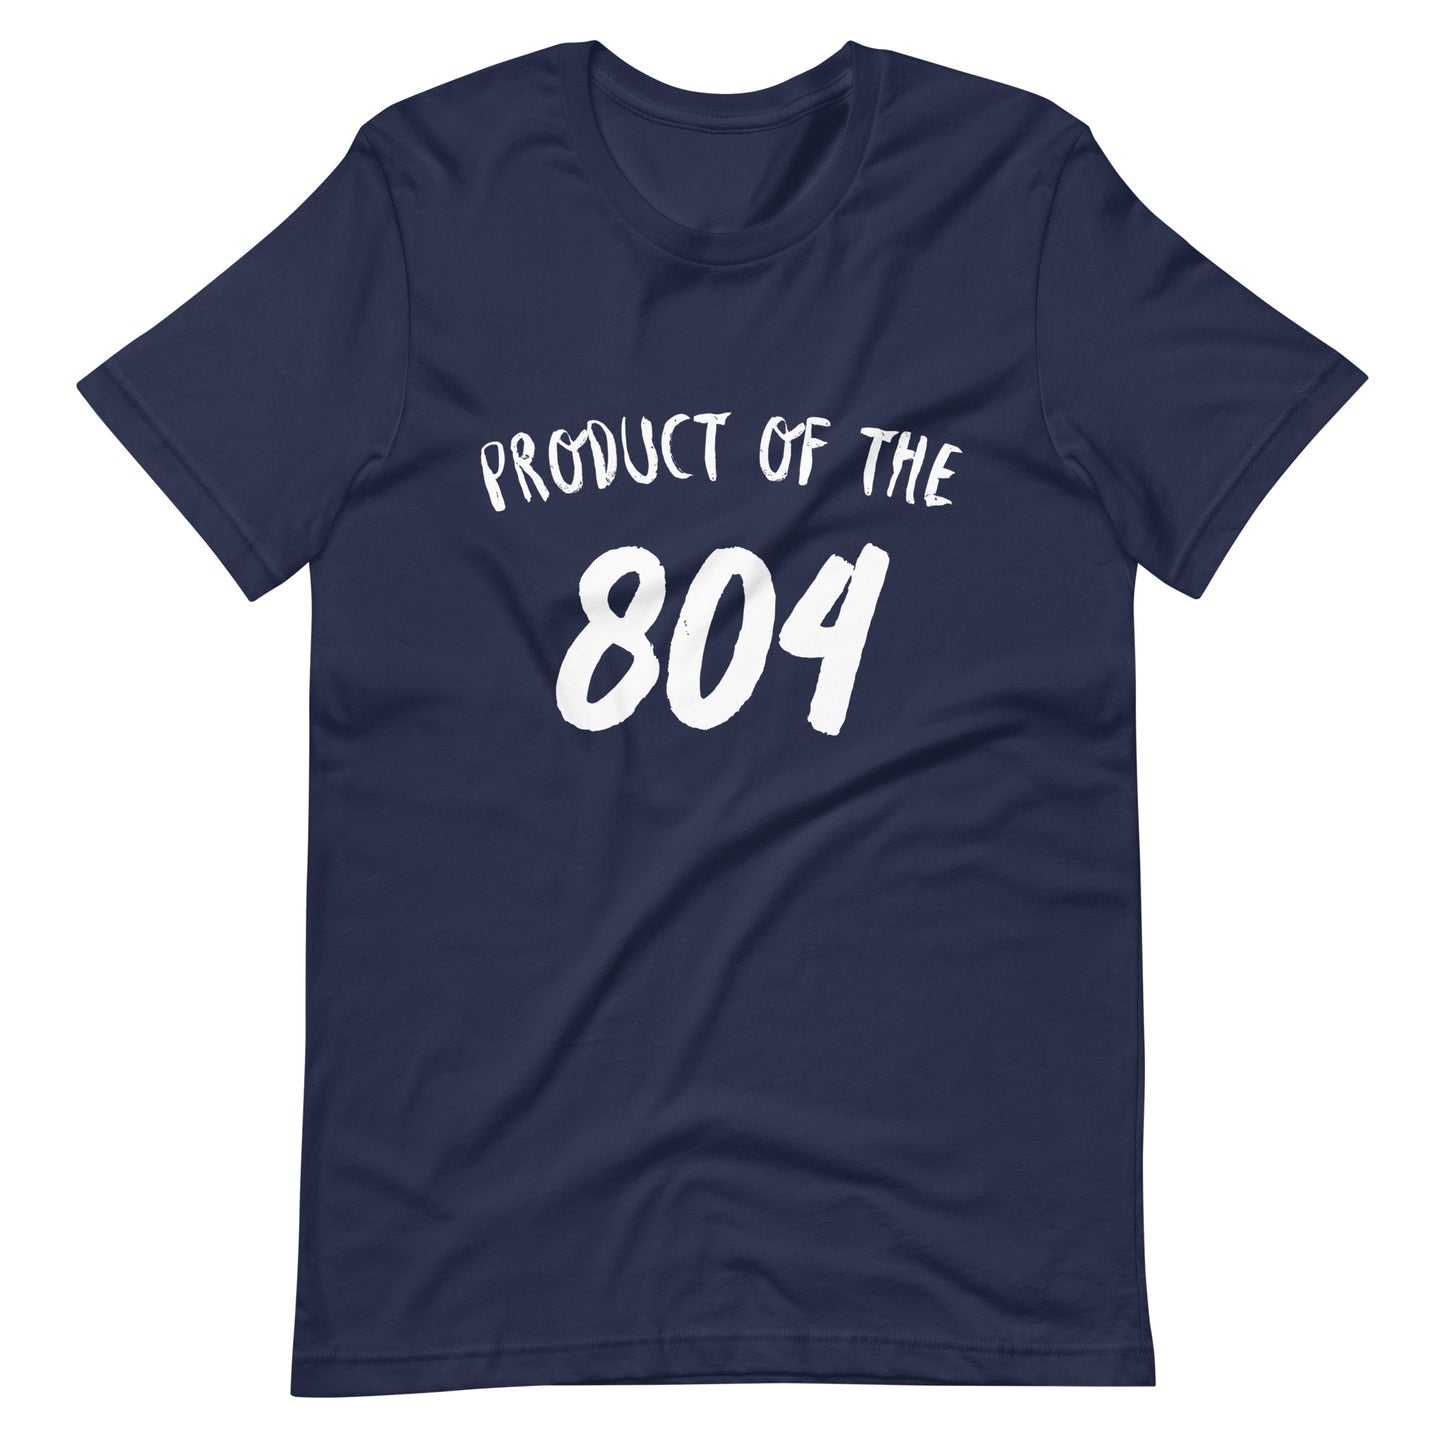 Product of the "804" Unisex t-shirt